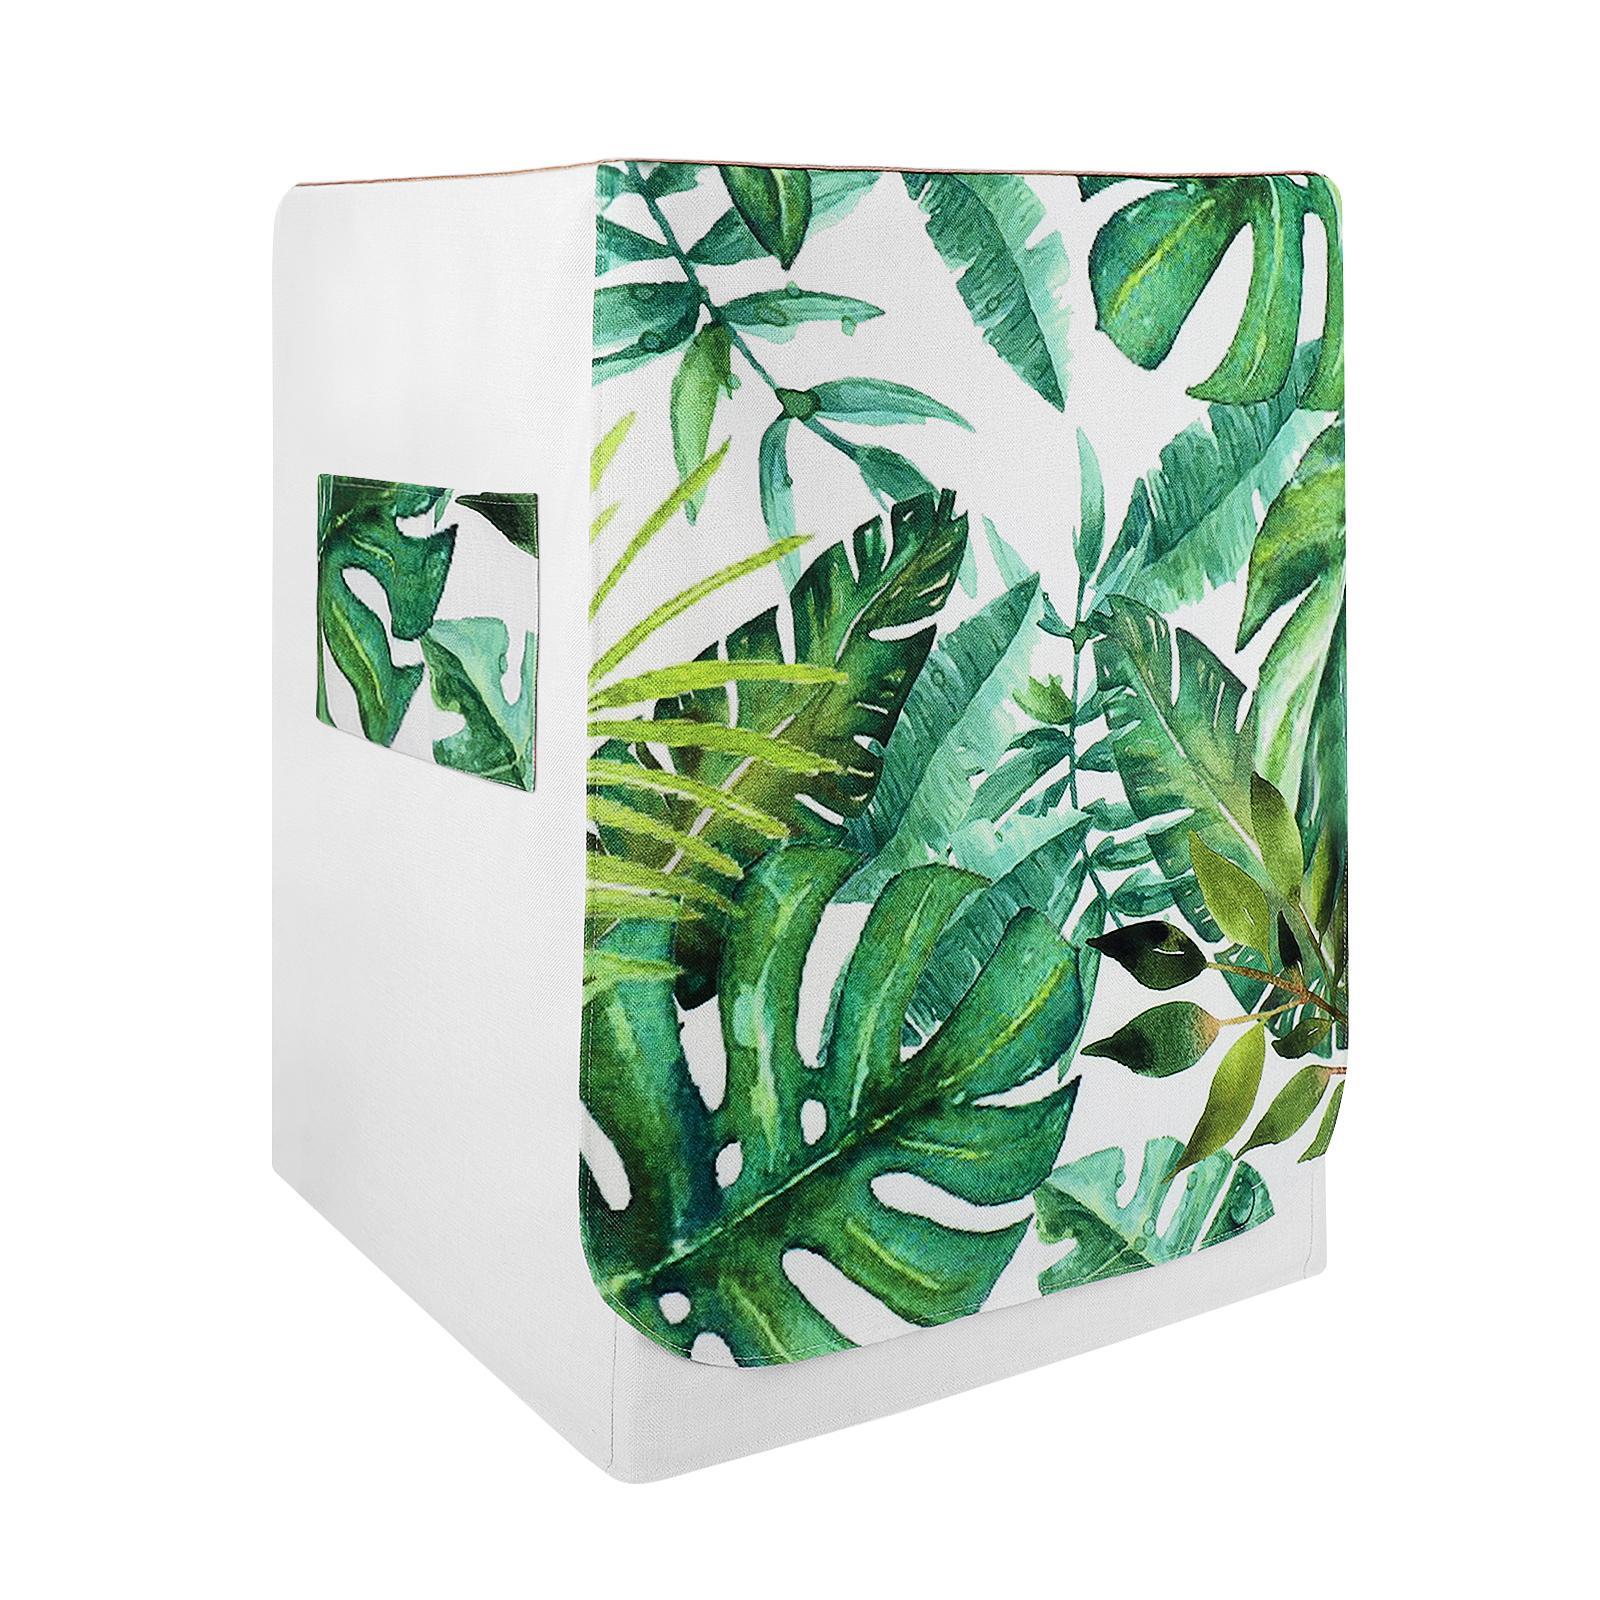 Washing Machine Cover Linen Cotton Forest Leaves Printing Dust Cover Household Fully Automatic Washing Machine Cover for Home Laundry